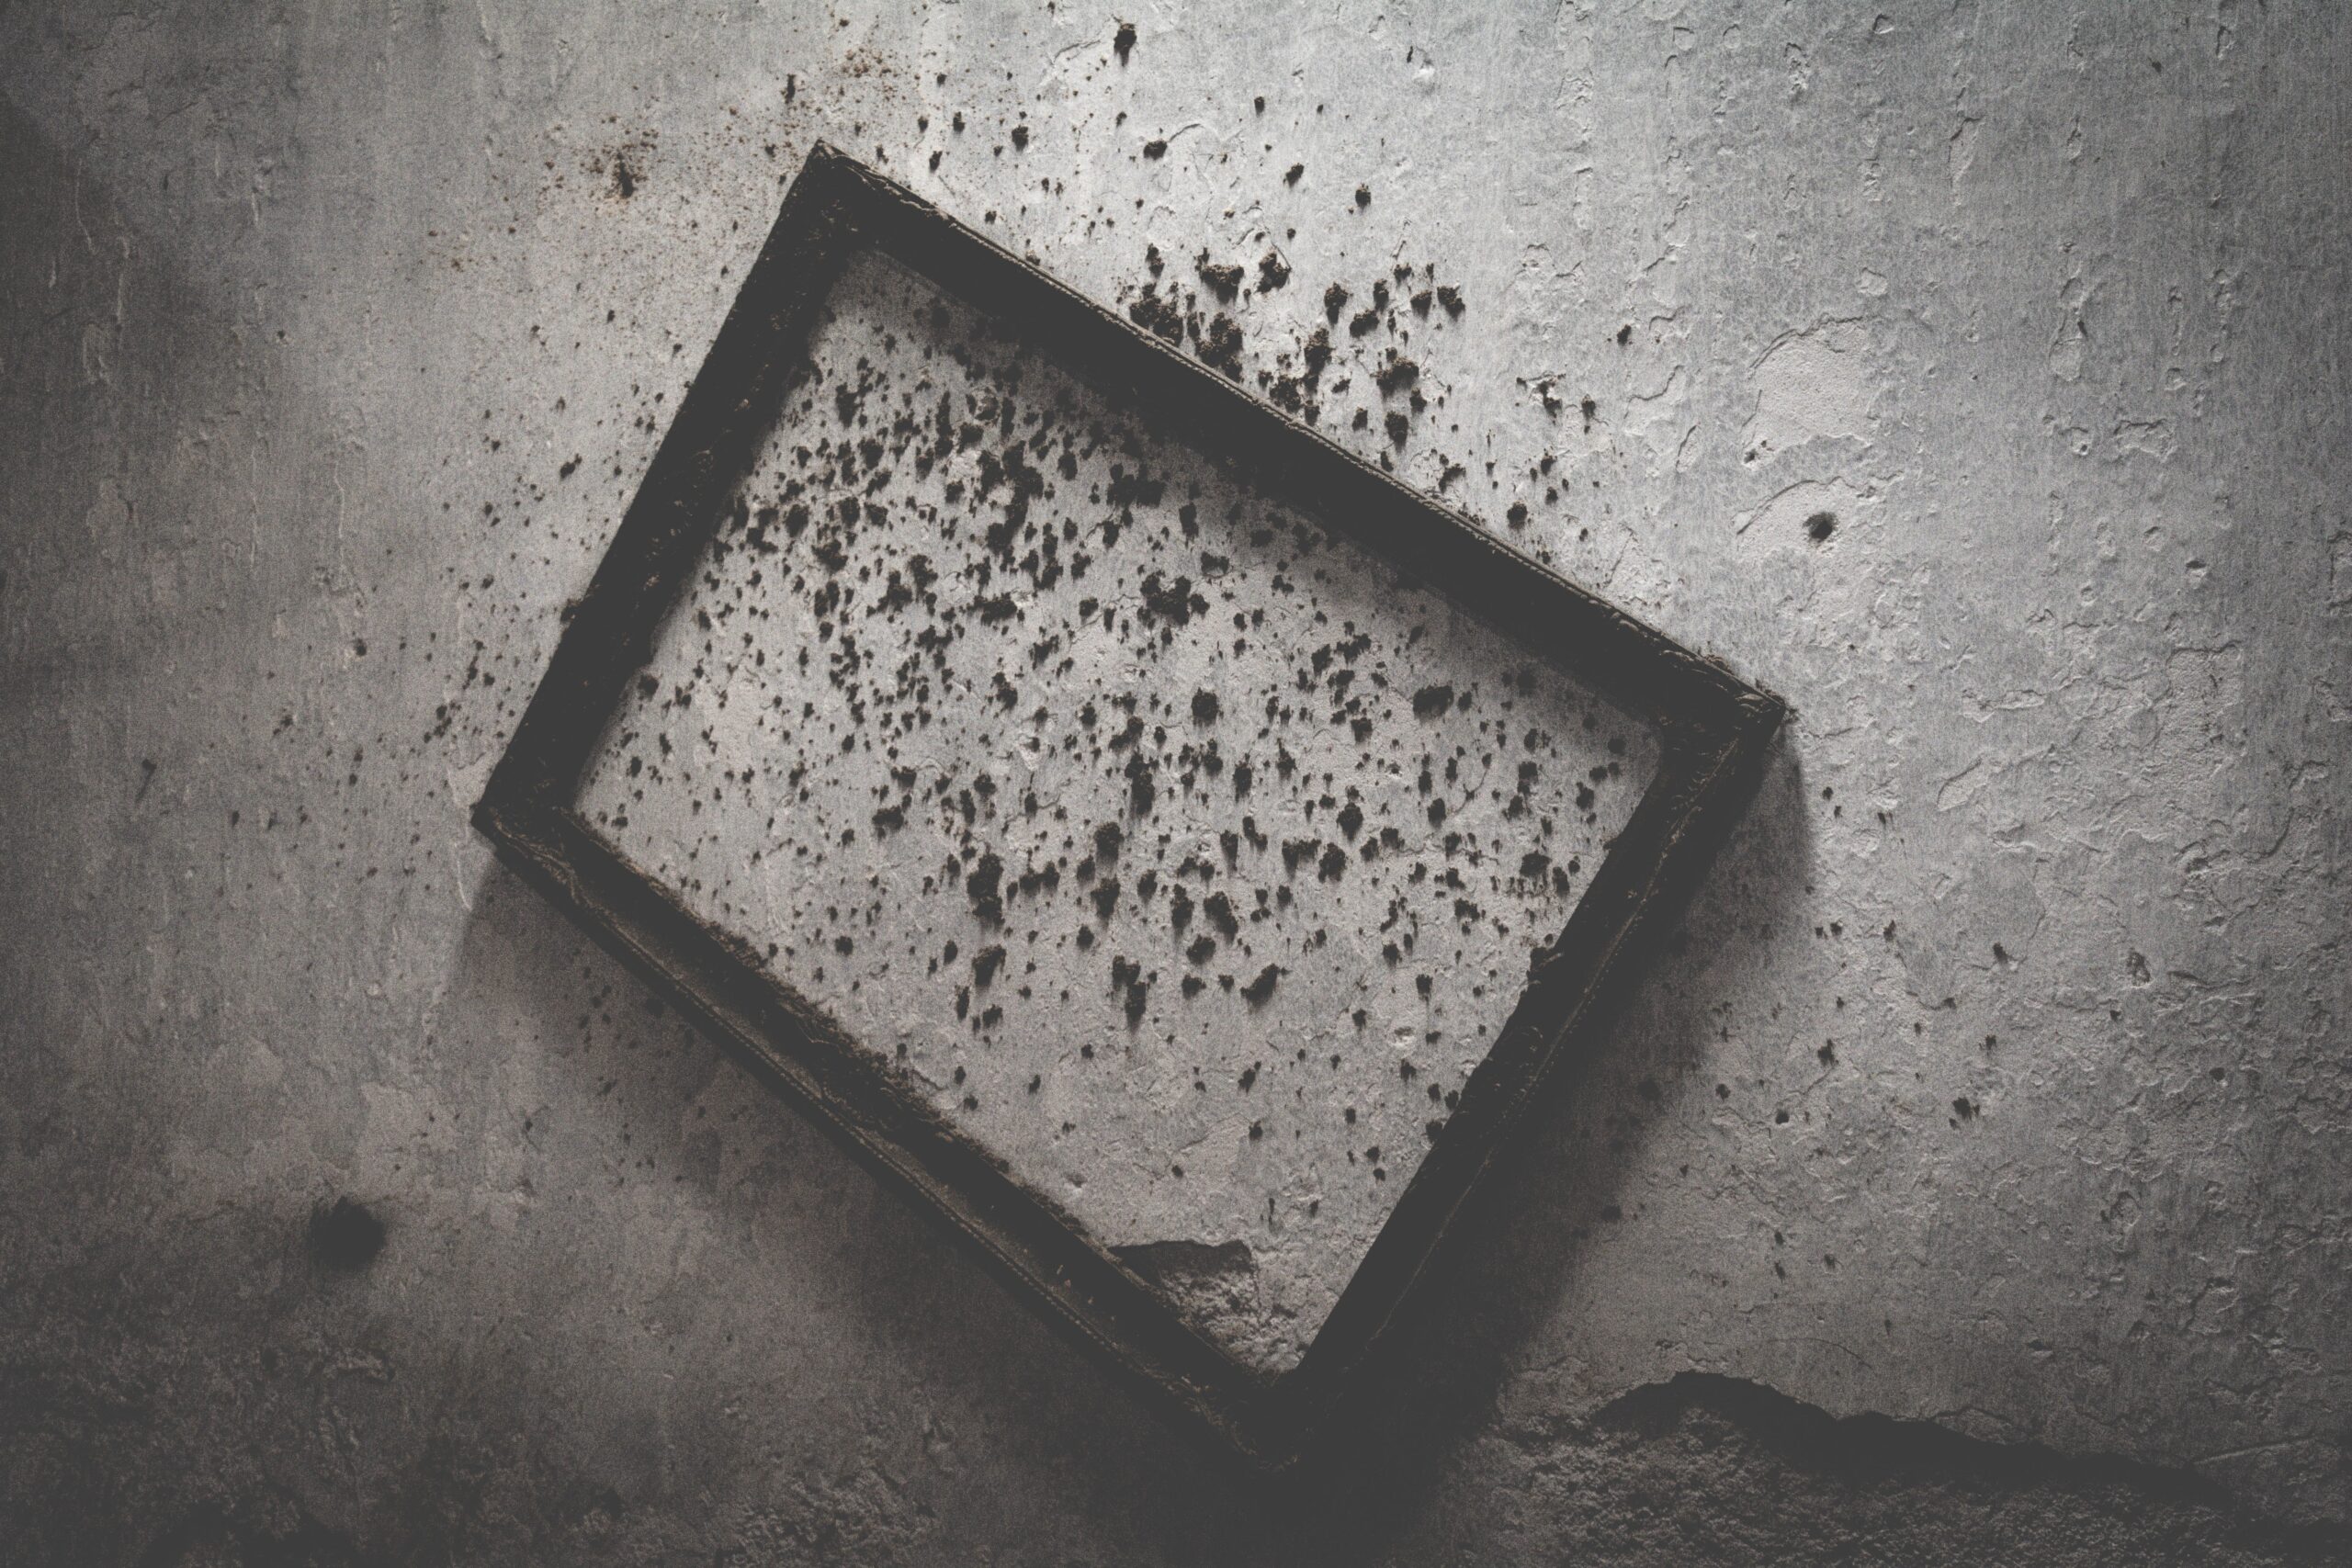 How Can I Get Rid of Mold Inside My Home?